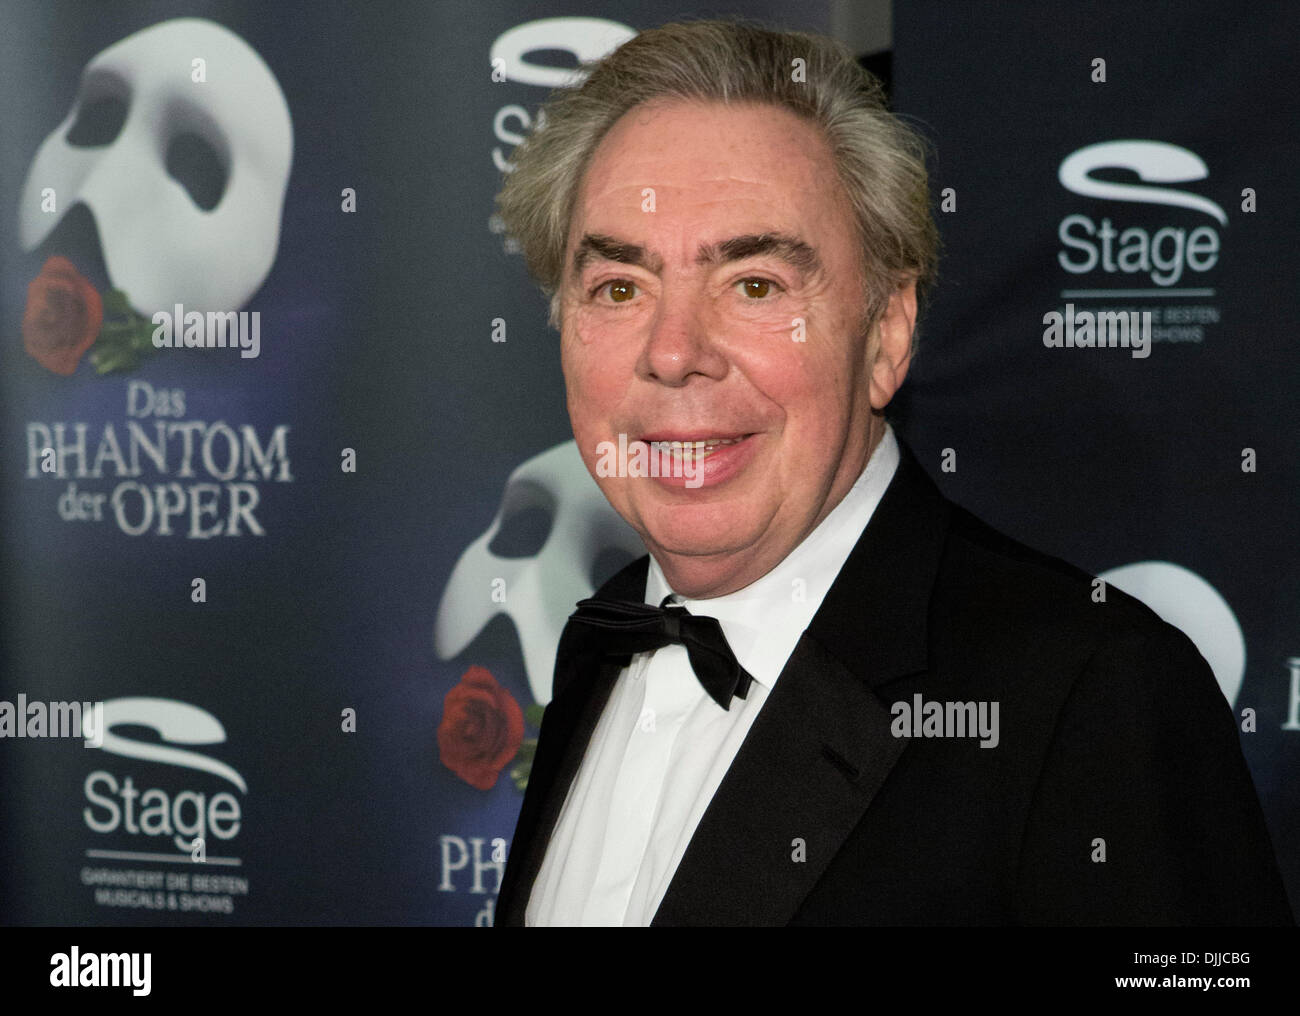 Hamburg, Germany. 28th Nov, 2013. Composer Andrew Lloyd Webber poses on the red carpet outside of the Neue Flora at the premiere of the musical 'Phantom of the Opera' in Hamburg, Germany, 28 November 2013. The musical has returned to Hamburg for ten months. Photo: GEORG WENDT/dpa/Alamy Live News Stock Photo